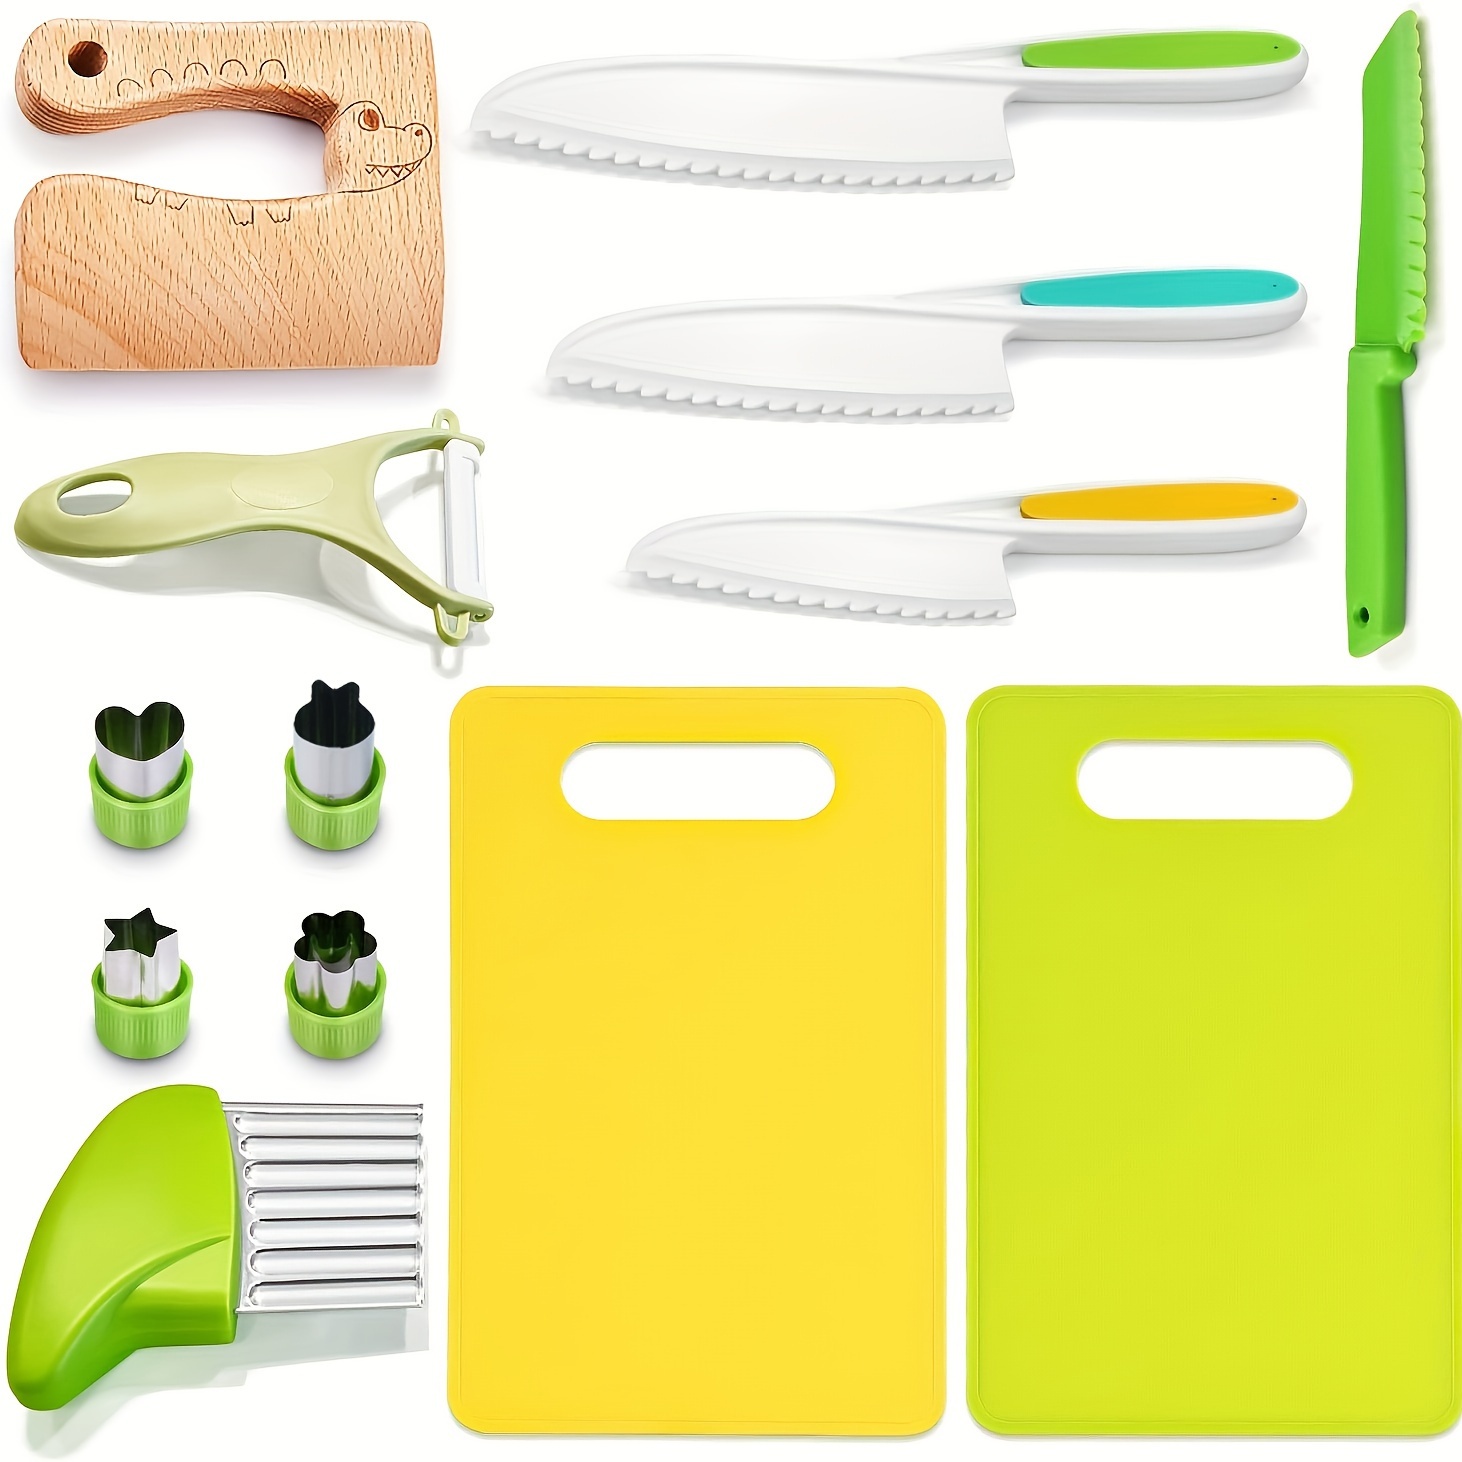 Montessori Cooking Tools - A Real Kitchen Set Safe for Children!